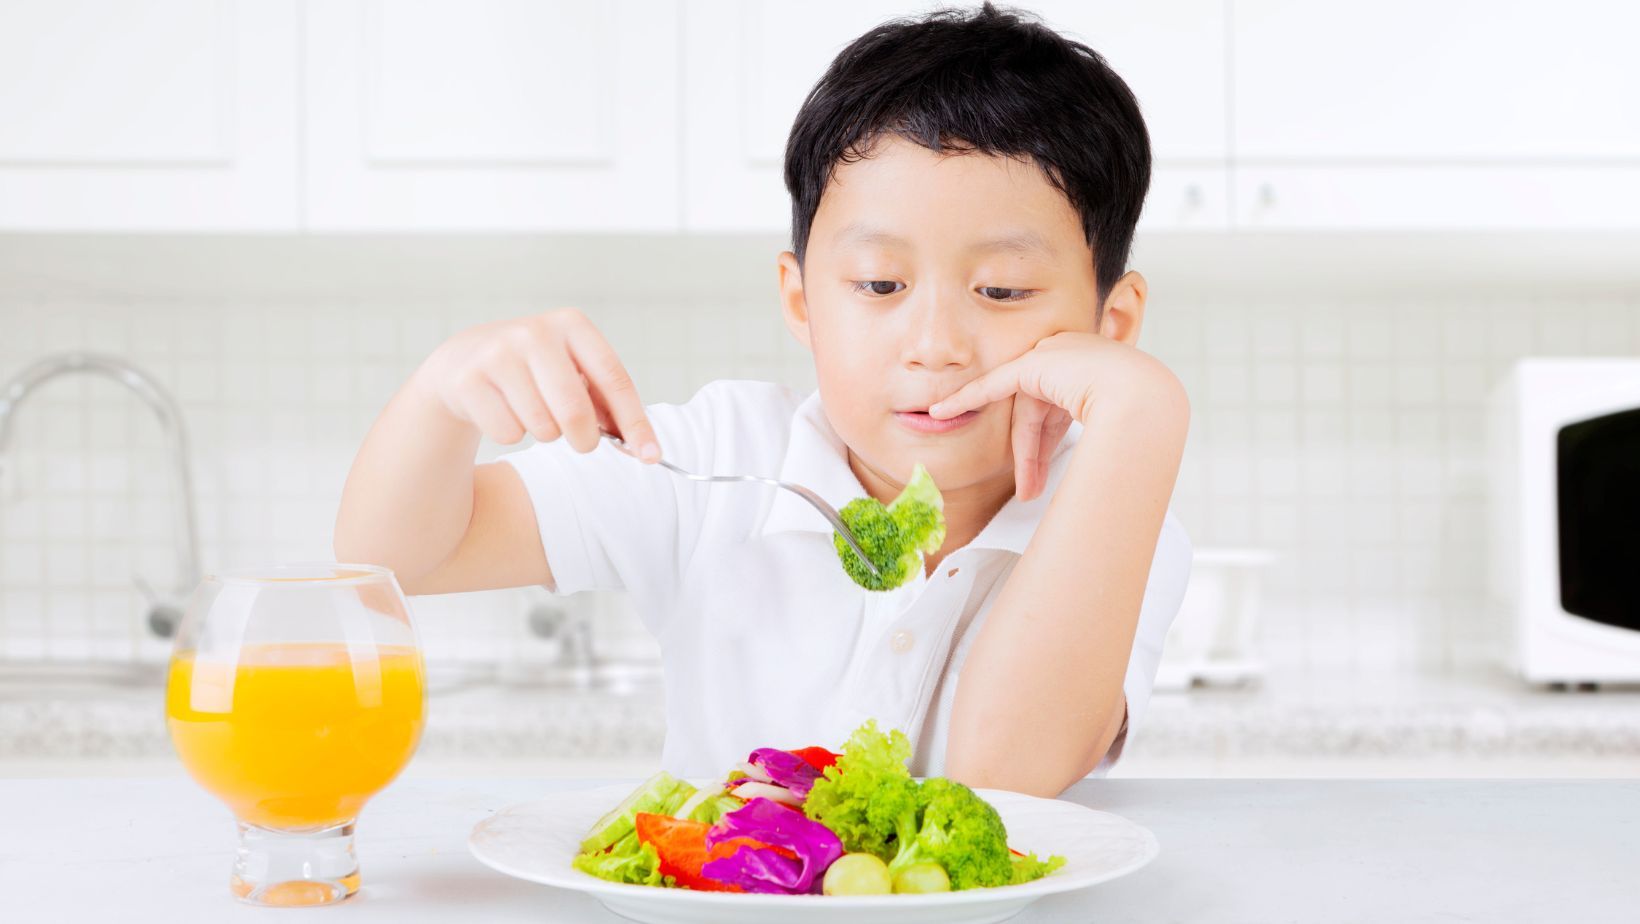 Best Vitamins for Kids to Gain Weight